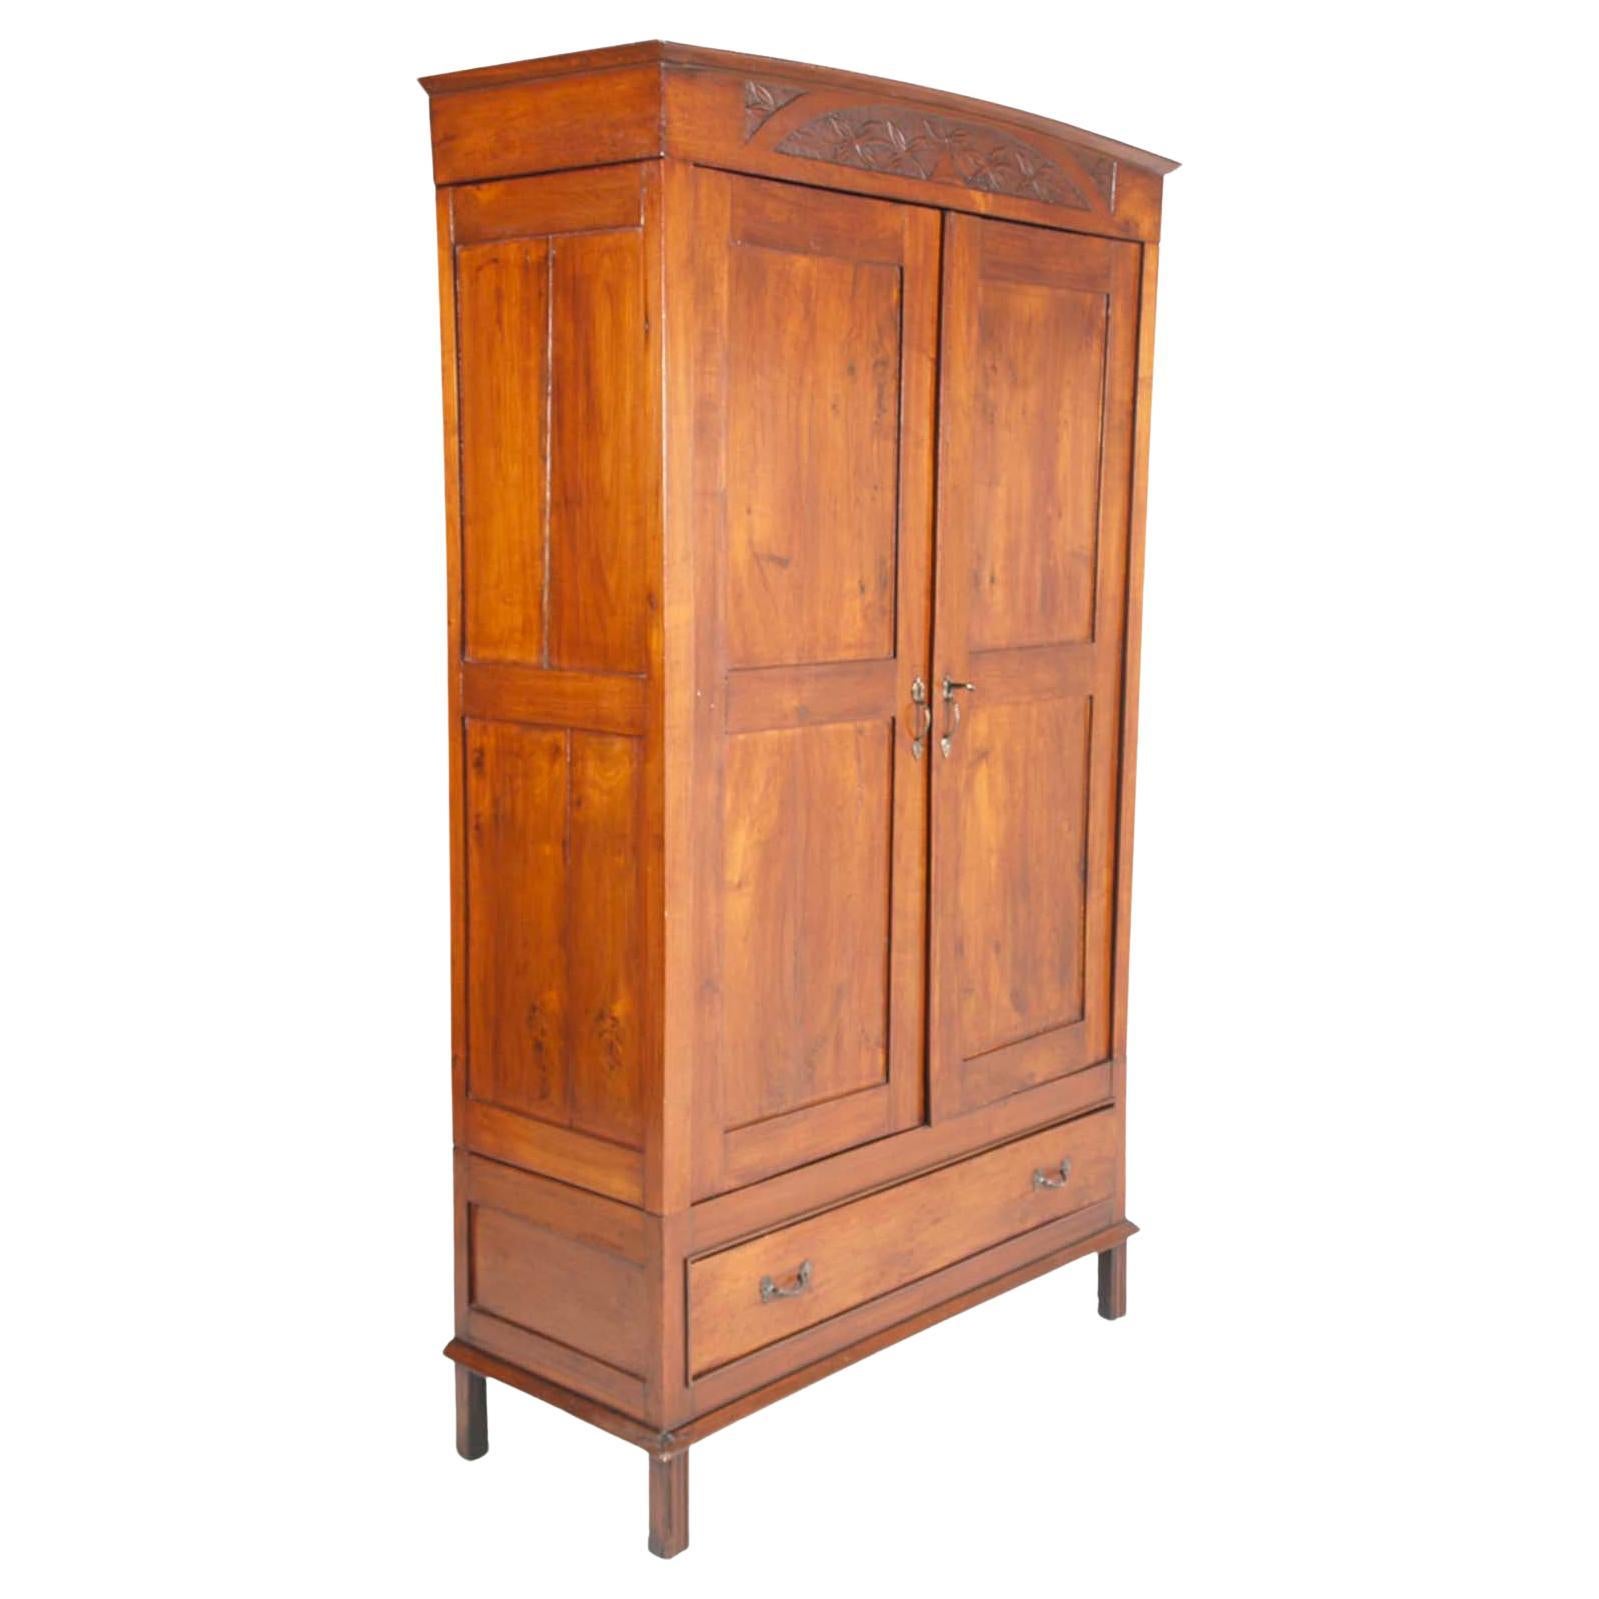 Florentine Art Nouveau Wardrobe in Solid Cherry Wood by Dini & Puccini, Cascina For Sale